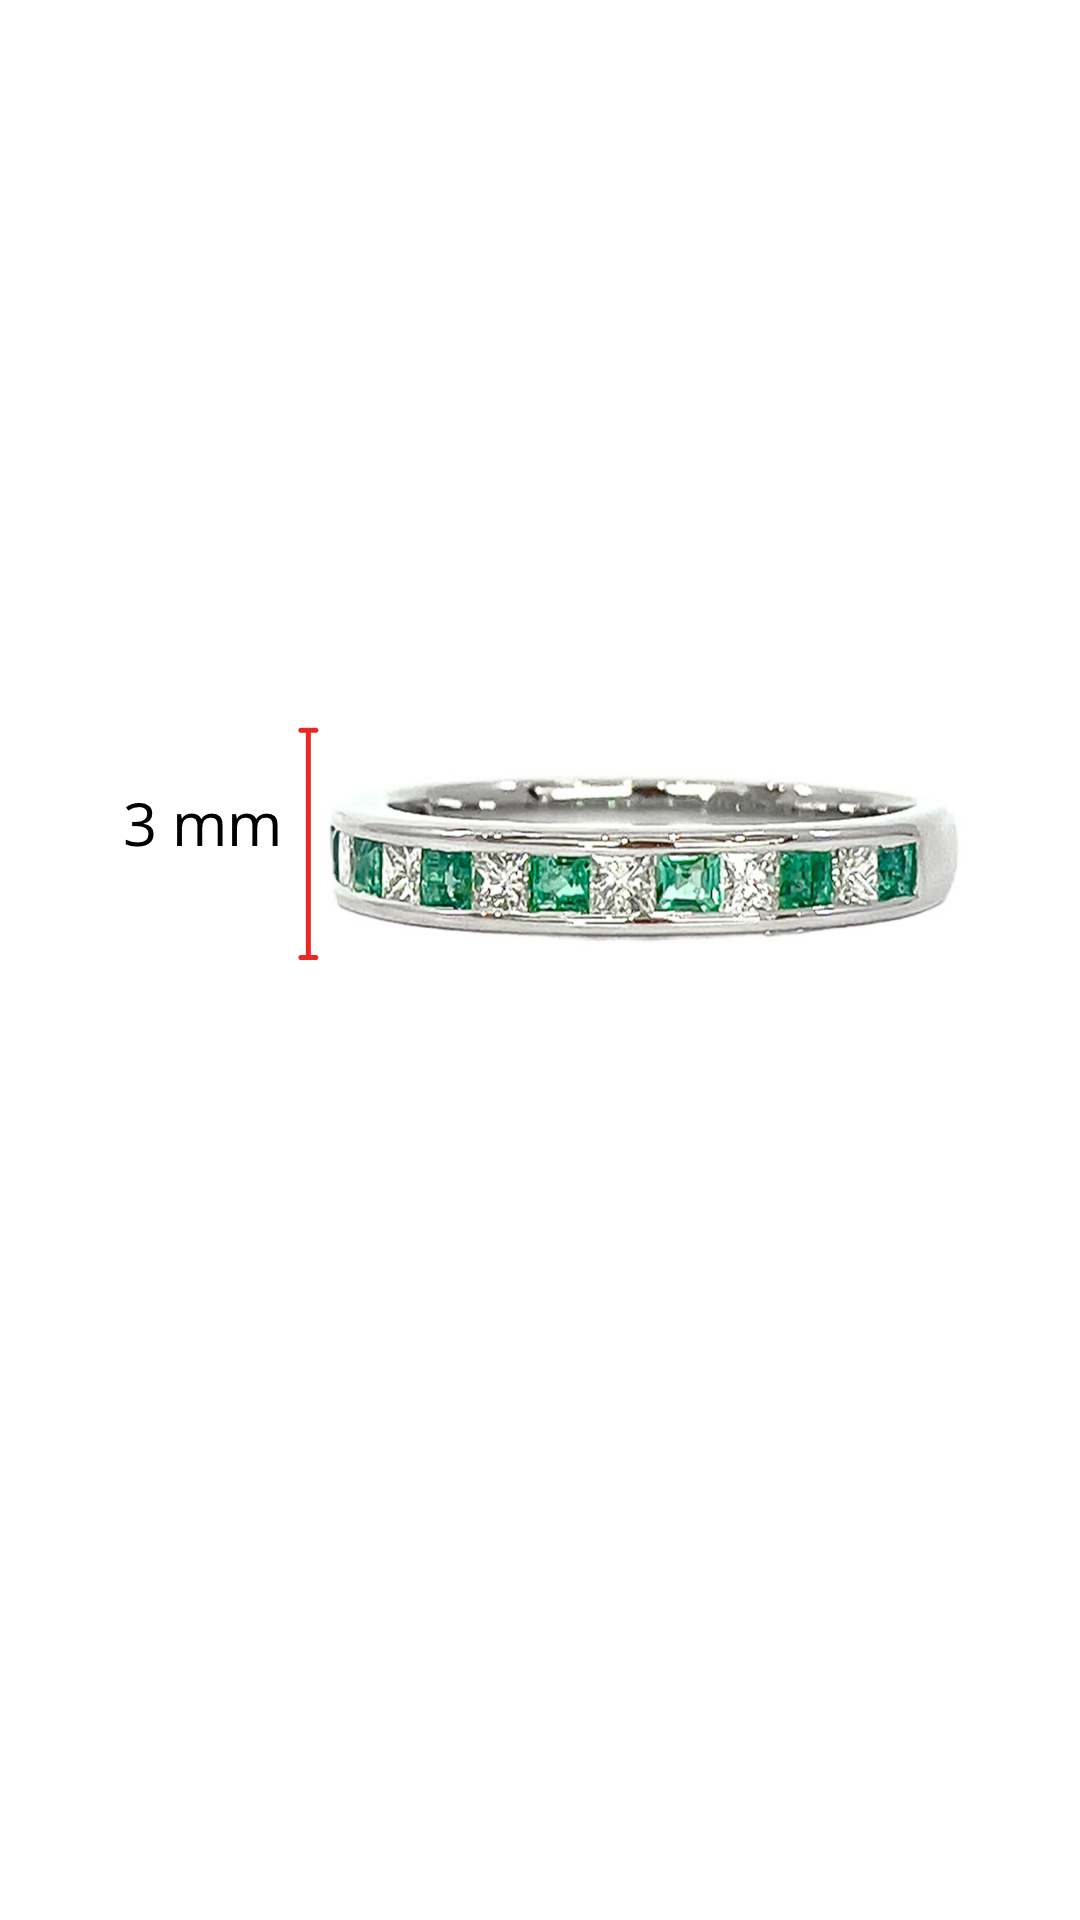 10K White Gold 0.30cttw Princess Cut Emerald and 0.28cttw Diamond Channel Set Ring - Size 6.5